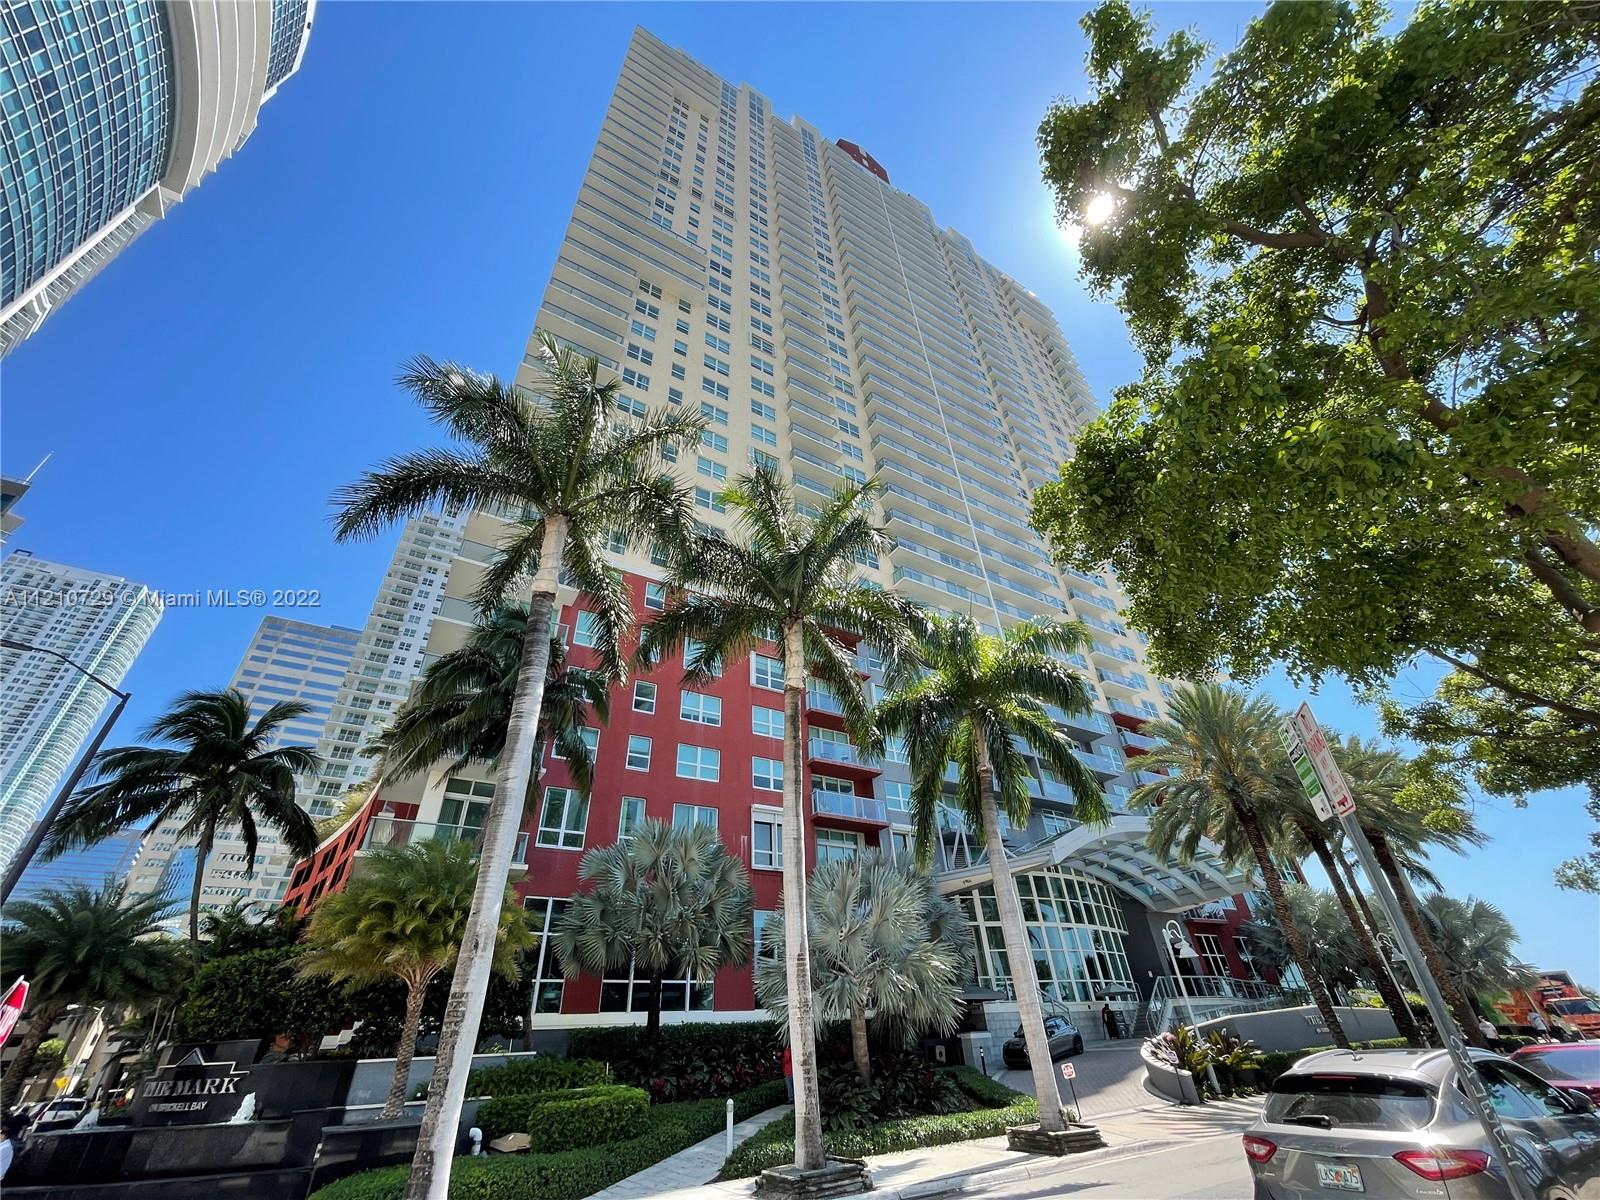 High floor unit at the The Mark on Brickell! This split floor plan 2/2 offers loads of natural light in all rooms, spacious master suite with walk-in closet and open kitchen to family and dining area. Full size washer and dryer. One assigned space and one valet. Building offers such amenities as pool, gym, tennis courts, and ground level fine dining with gorgeous water views! Walking distance to the City Center Mall, Mary Brickell Village and Publix! Association allows for a 30 day minimum rental up to 12 times per year. A great opportunity!